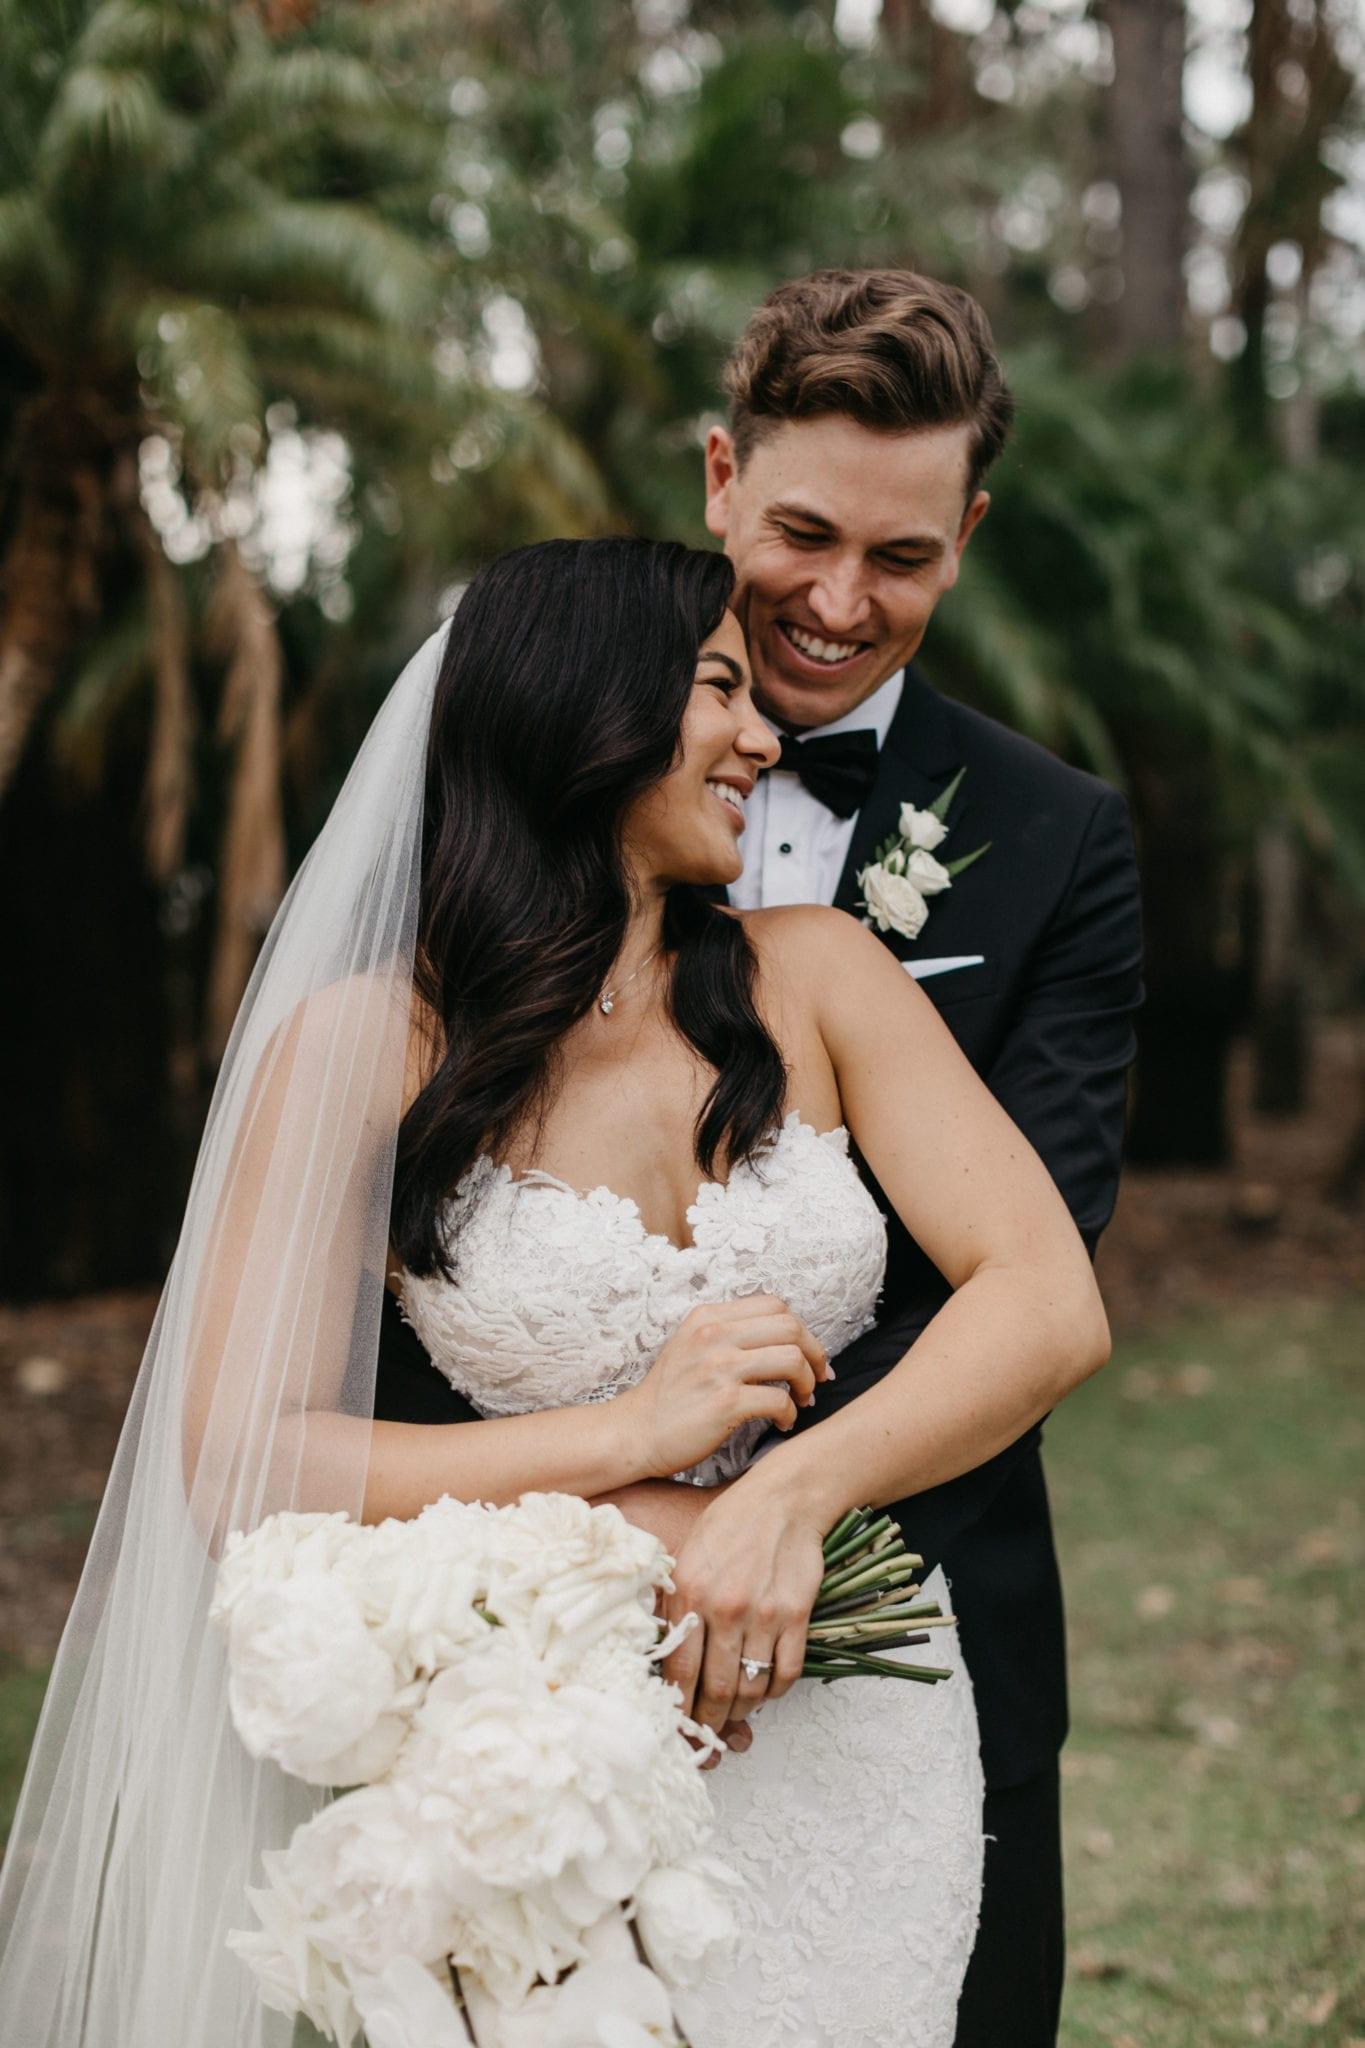 Sophia & Anthony’s Classic Sanctuary Cove Wedding - White Lily Couture